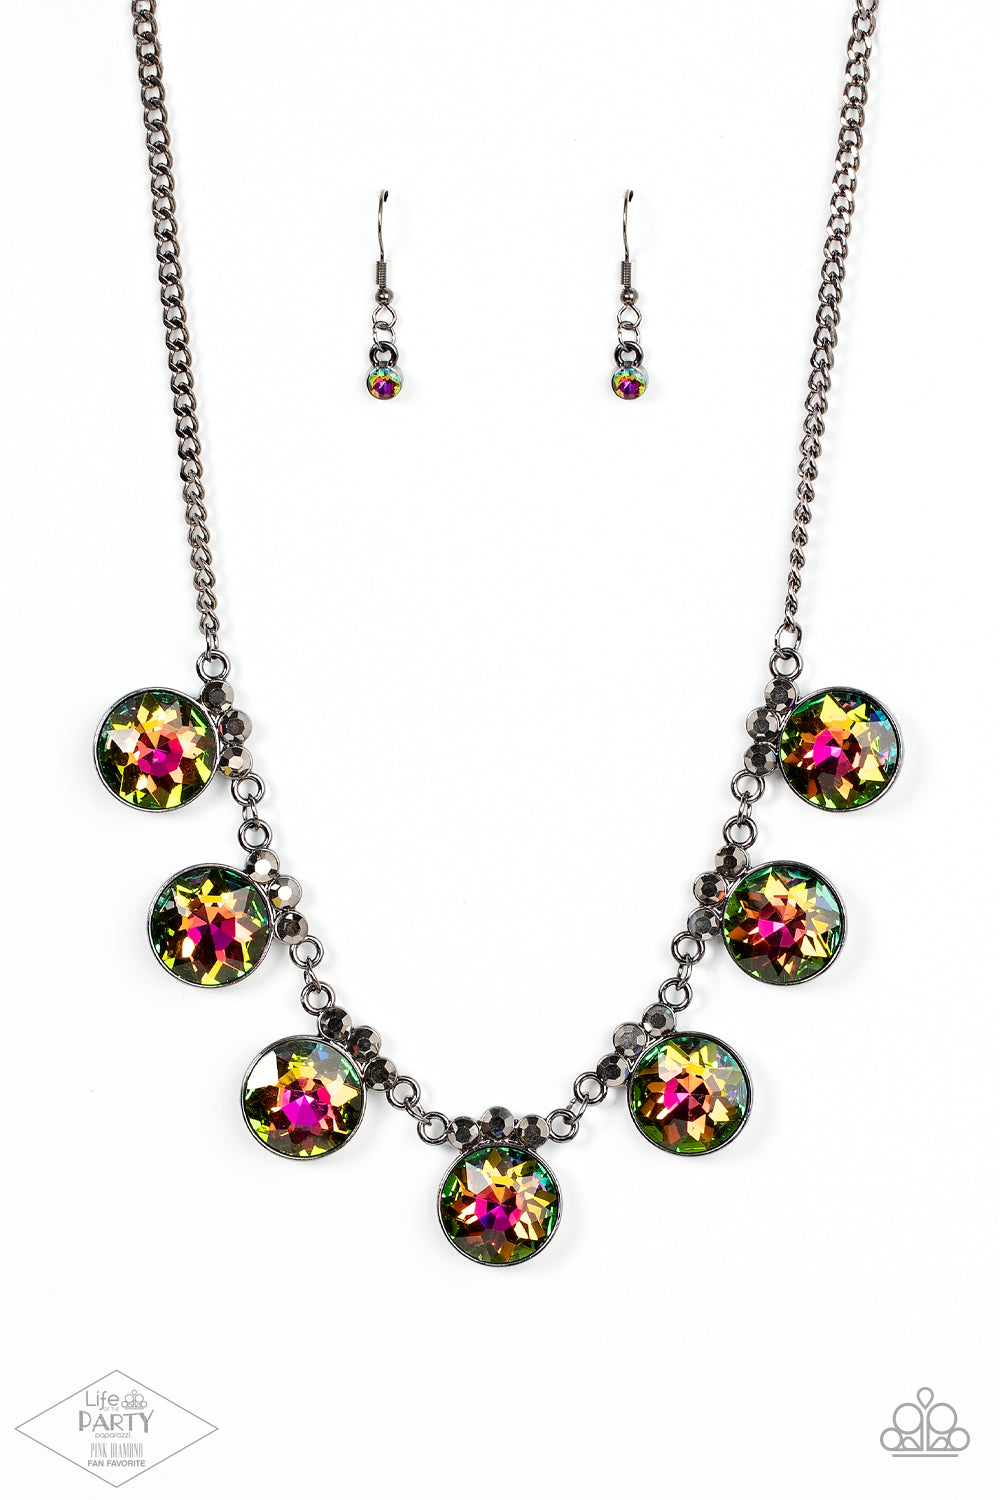 Paparazzi Accessories GLOW-Getter Glamour - Multi Oil Spill Life of the Party Necklaces crowned in a trio of dainty hematite rhinestones, an exaggerated display of oversized oil spill gems delicately link below the collar for a glamorous glow. Features an adjustable clasp closure.  Sold as one individual necklace. Includes one pair of matching earrings.